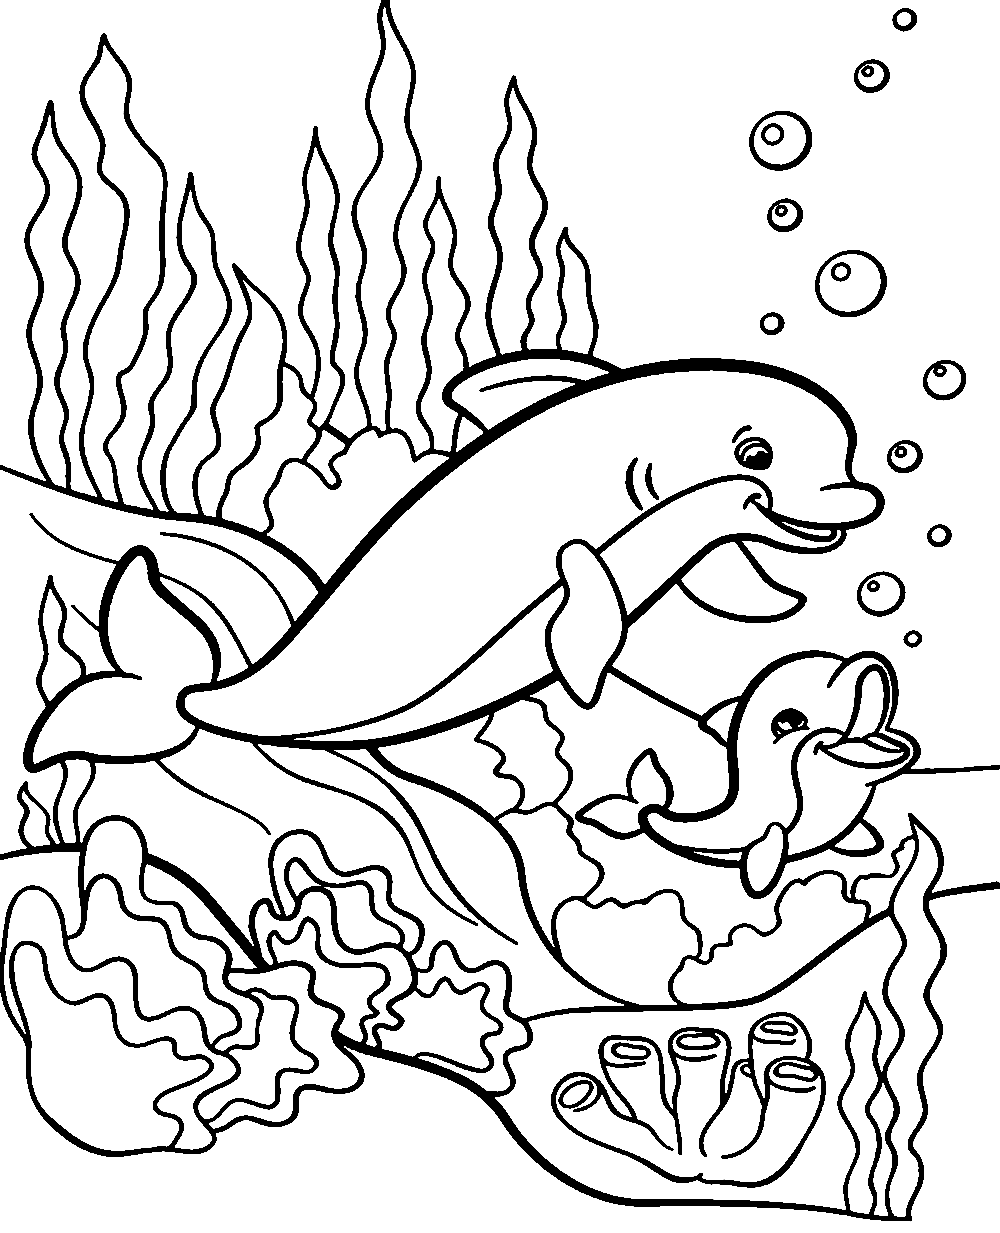 Mommy and Baby Dolphin Coloring Page for Toddlers